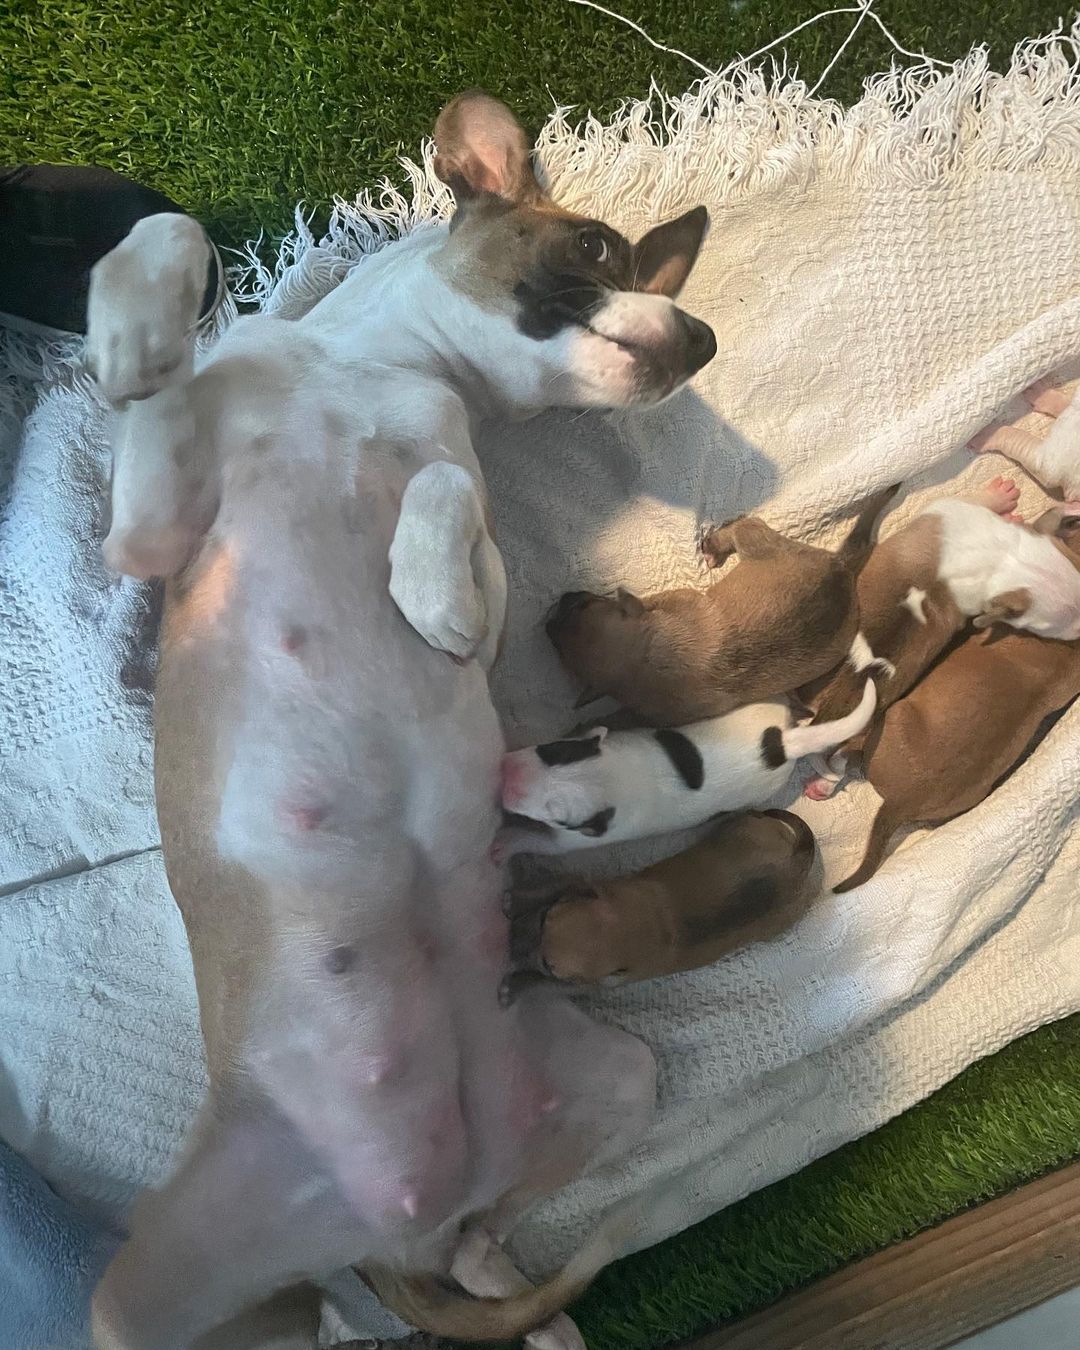 PUPDATE: Hanna and her pups are doing great! They are six days old today and growing fast!  We could not be more proud if our sweet mama Hanna, she is crushing motherhood. 

<a target='_blank' href='https://www.instagram.com/explore/tags/puppies/'>#puppies</a> <a target='_blank' href='https://www.instagram.com/explore/tags/sixdaysold/'>#sixdaysold</a> <a target='_blank' href='https://www.instagram.com/explore/tags/pupdate/'>#pupdate</a>